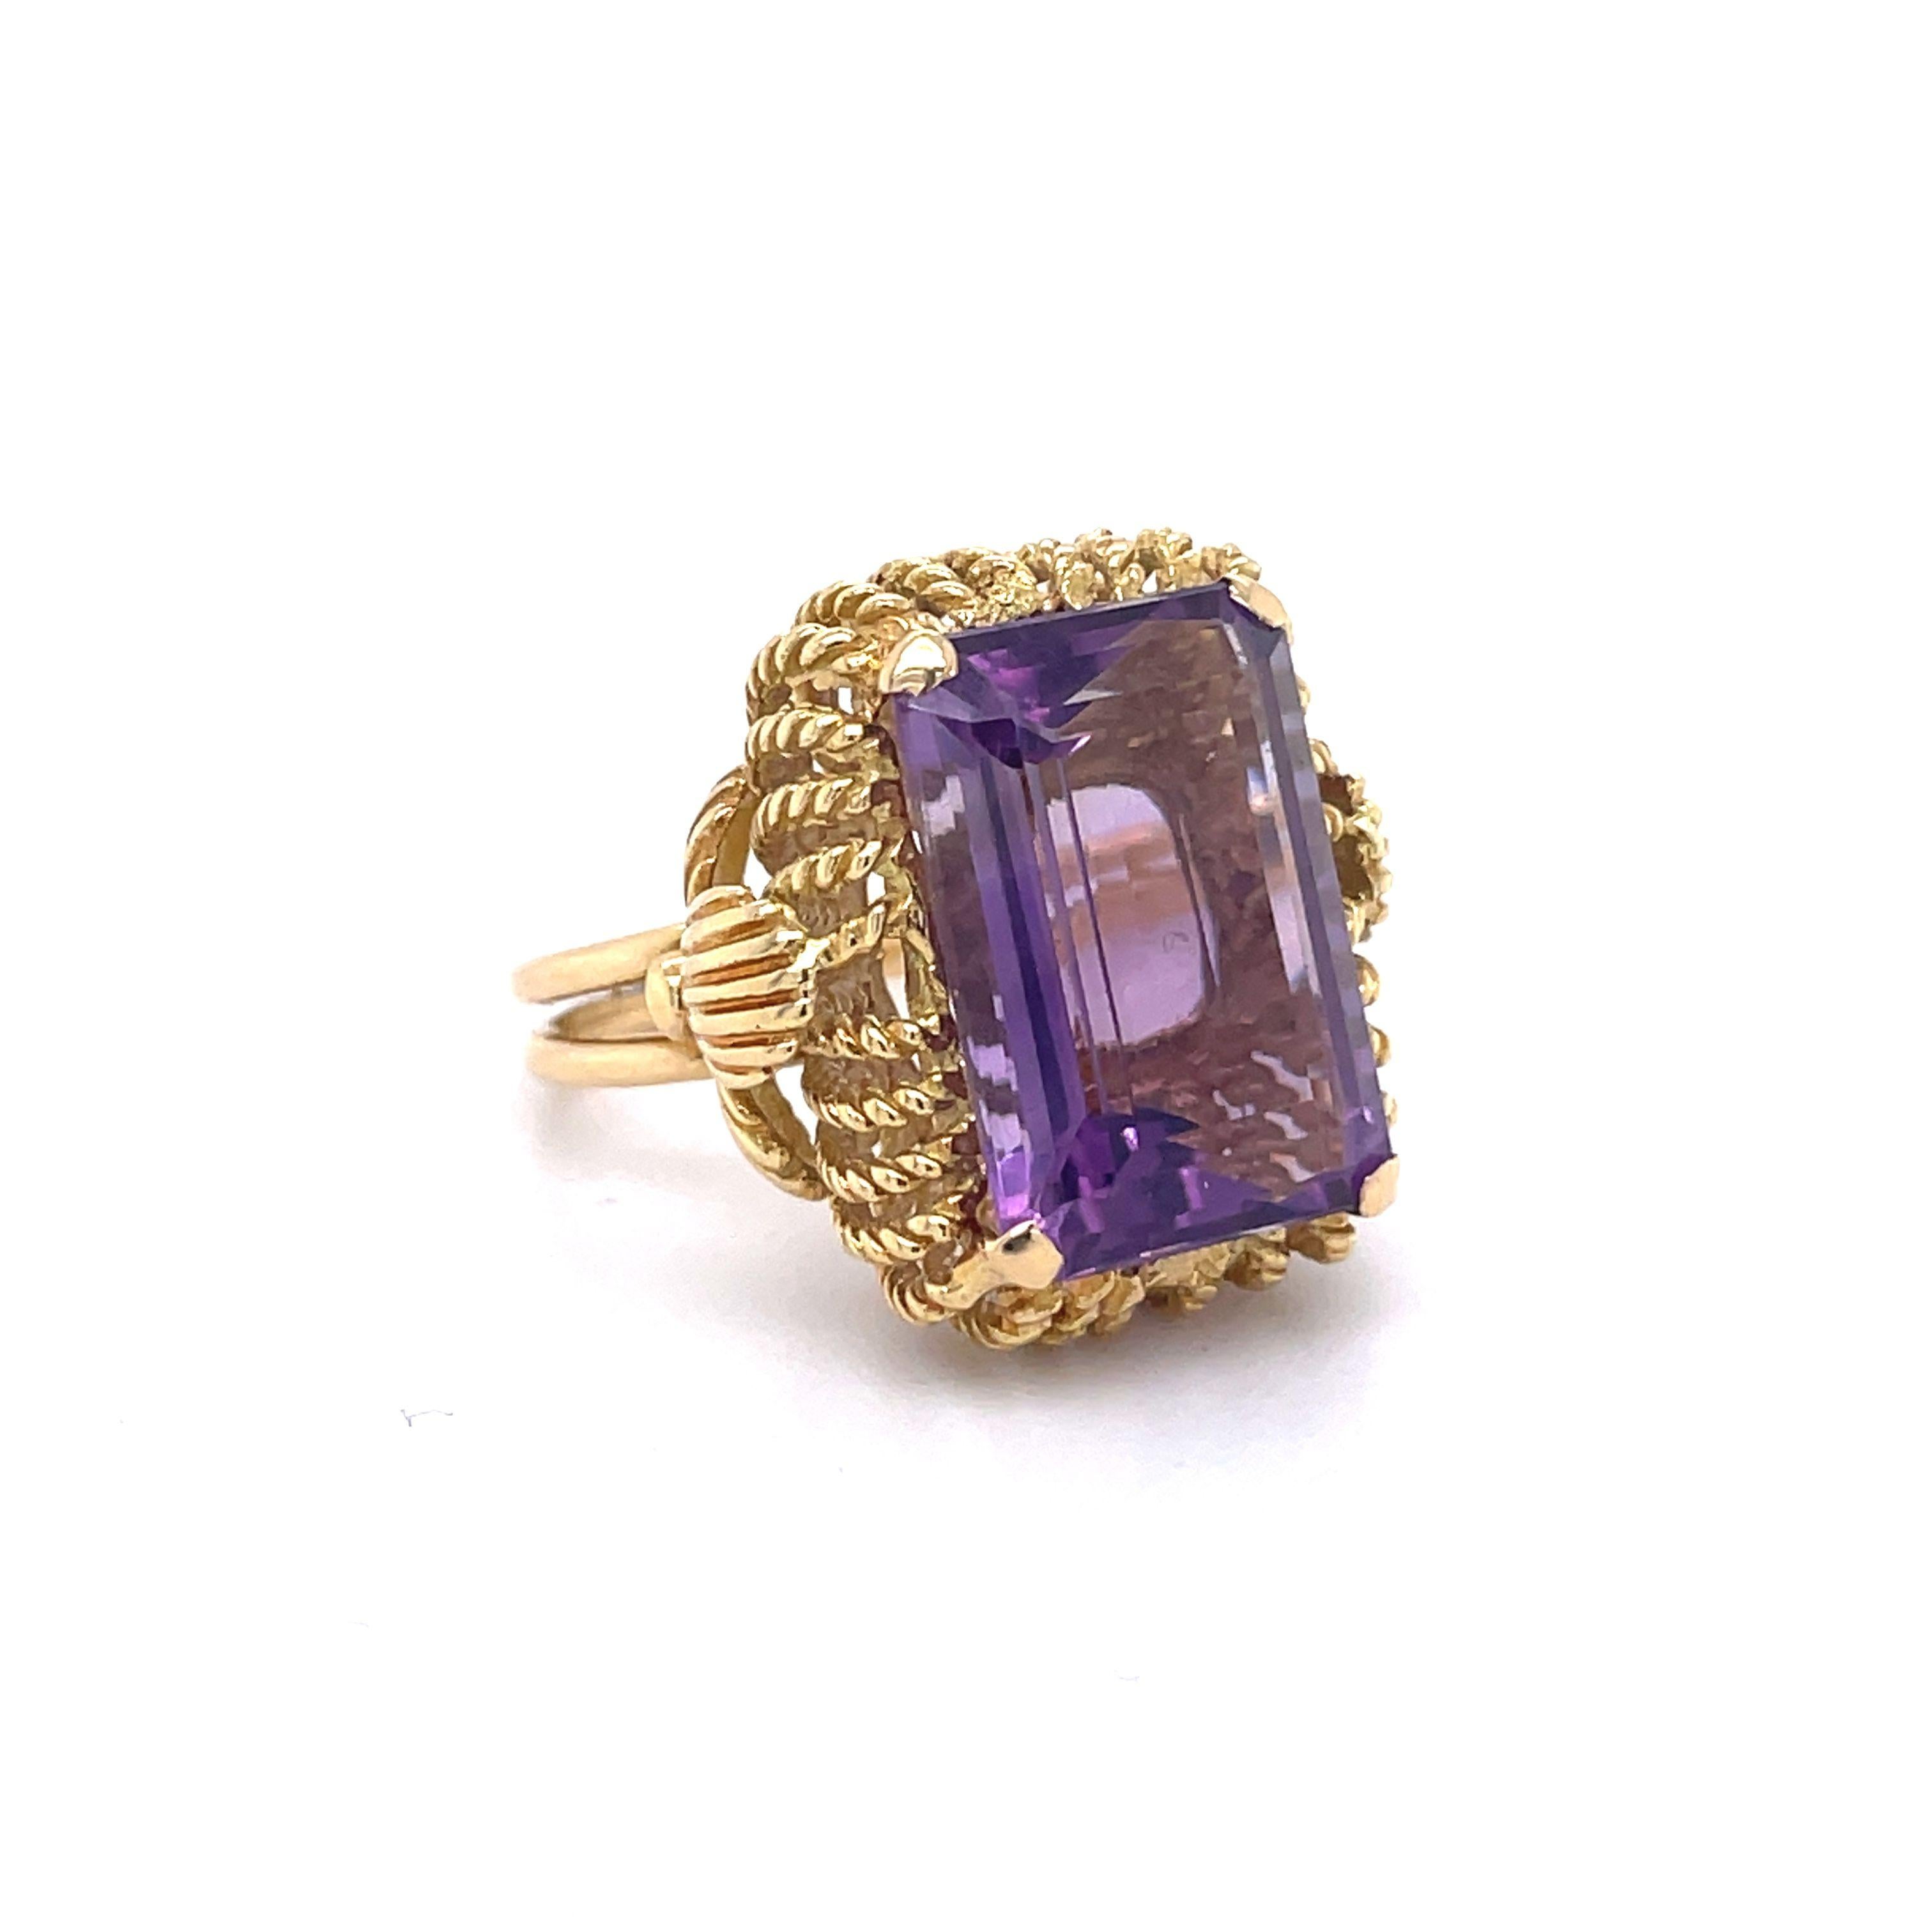 Retro Vintage Cocktail Ring, 10 Carat Emerald Cut Amethyst, Solid 18k Yellow Gold Ring For Sale